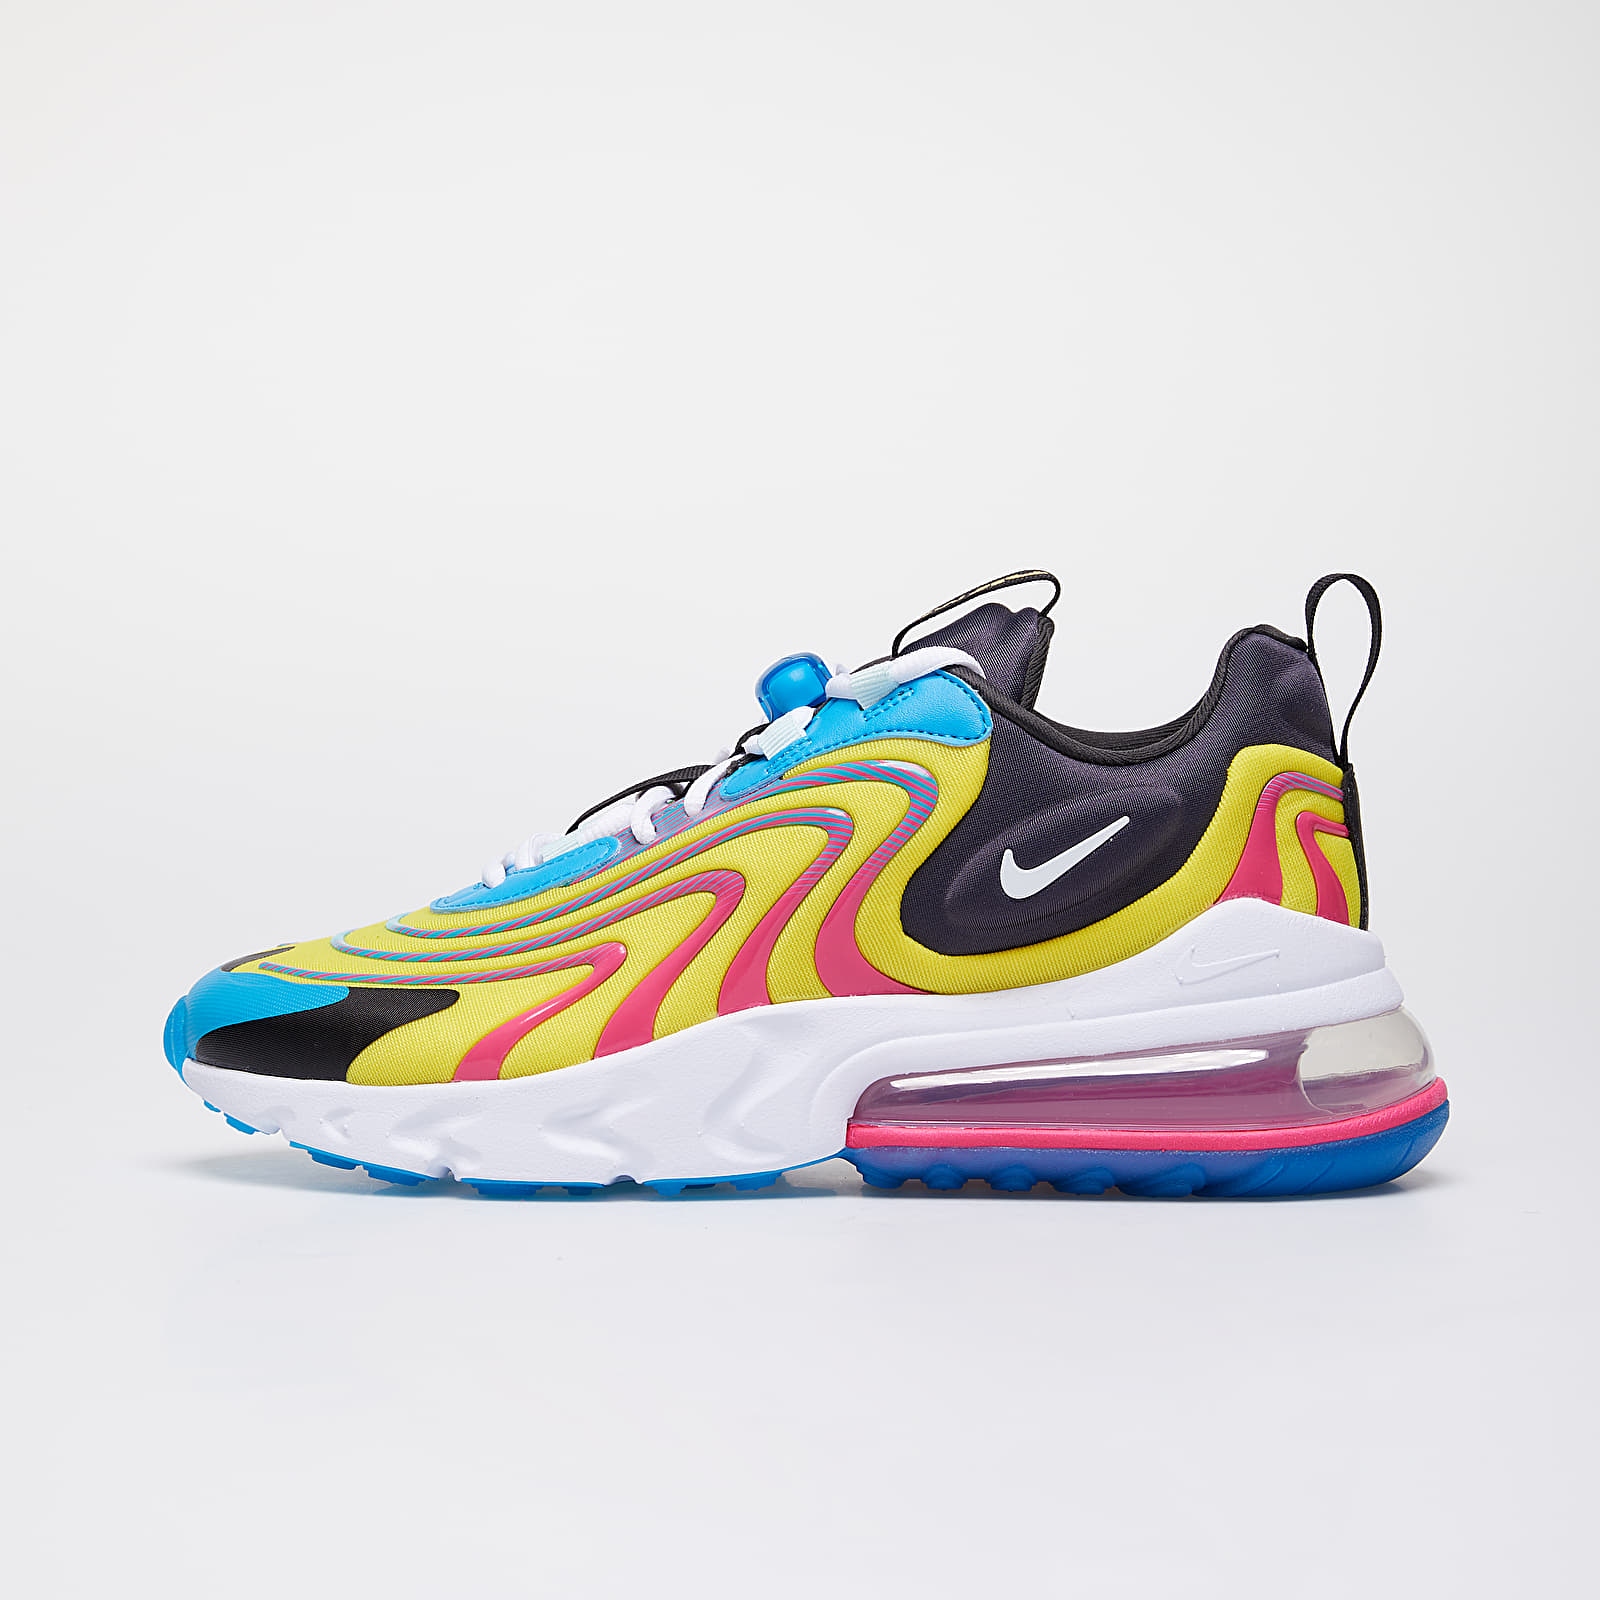 Buty męskie Nike Air Max 270 React Eng Laser Blue/ White-Anthracite-Watermelon